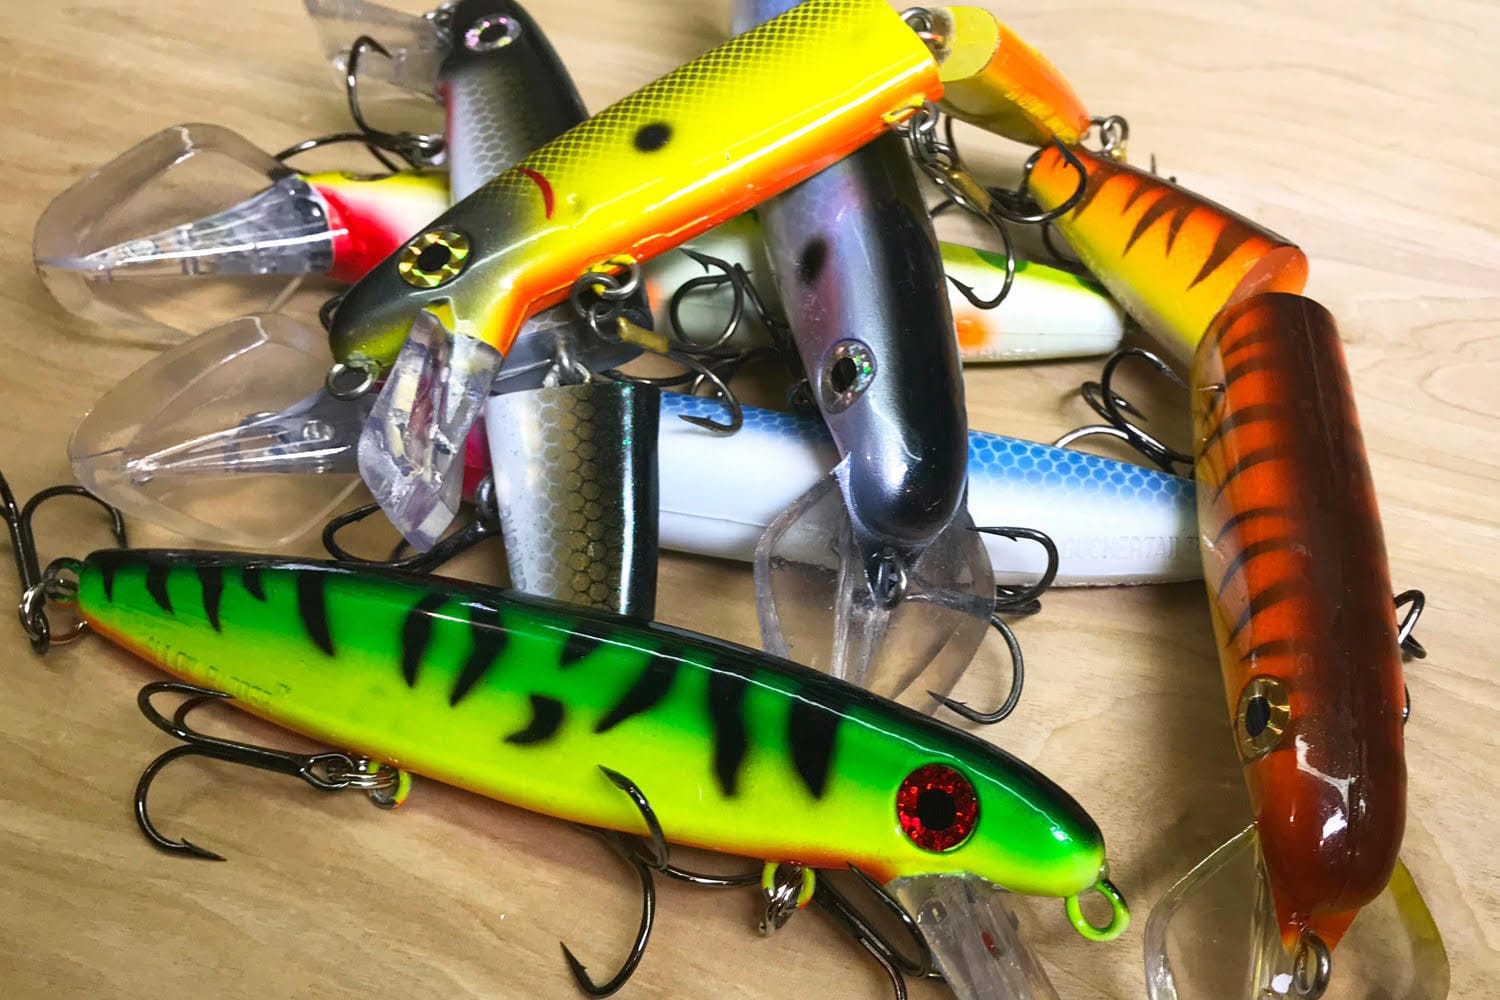 How important is fishing lure color? Does lure color make a